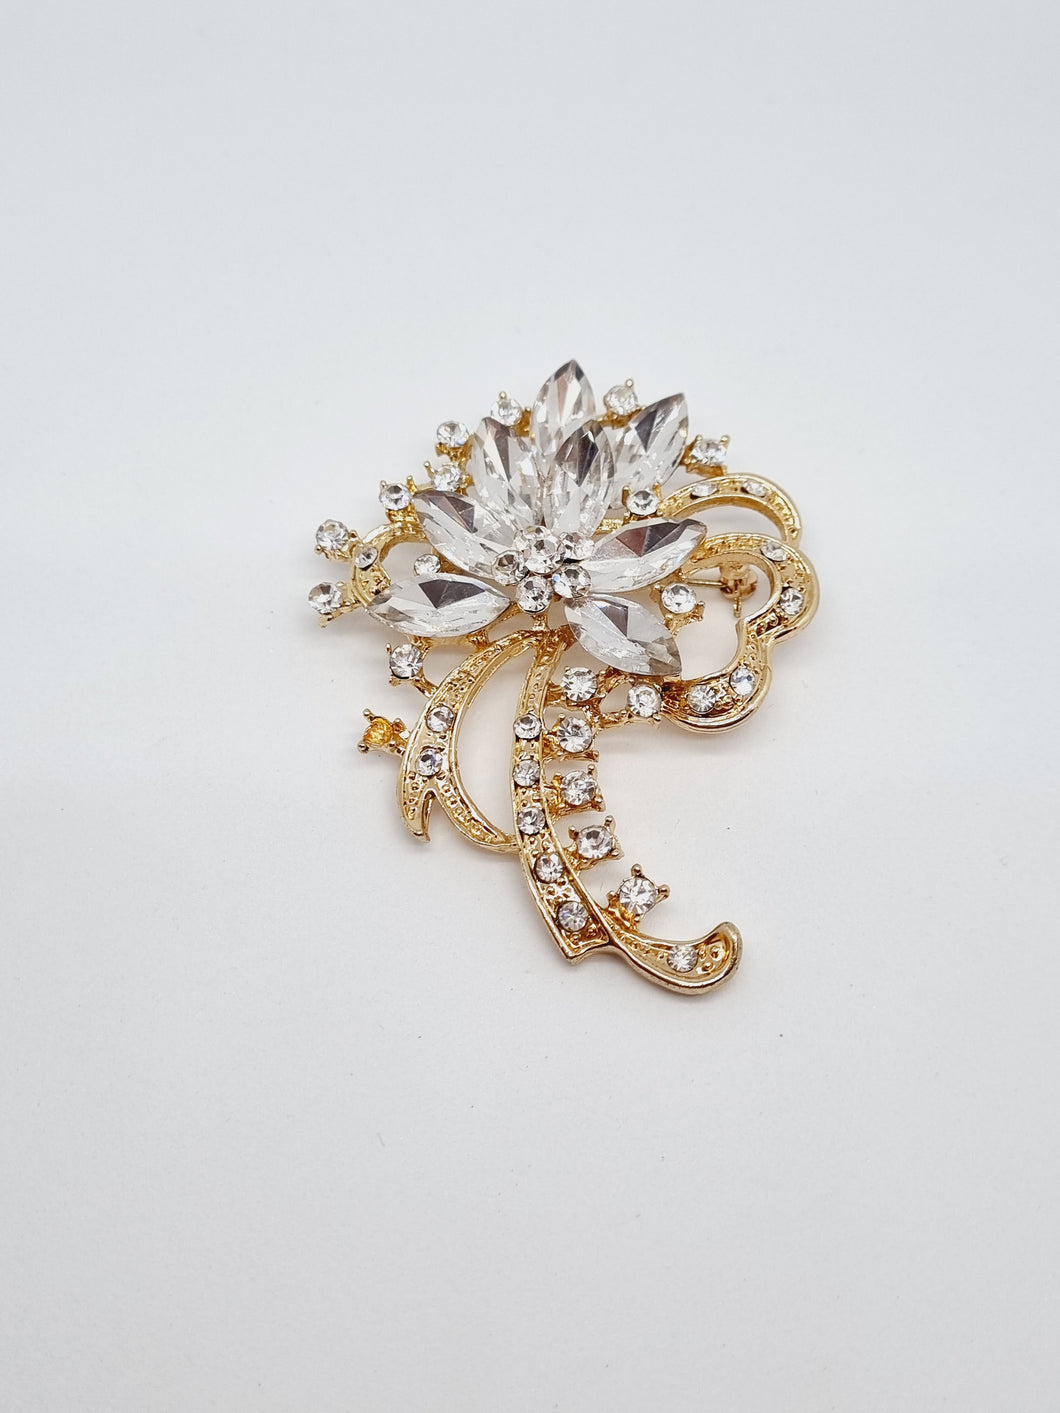 Fancy gold coloured crystal Brooch – Free postage in Australia